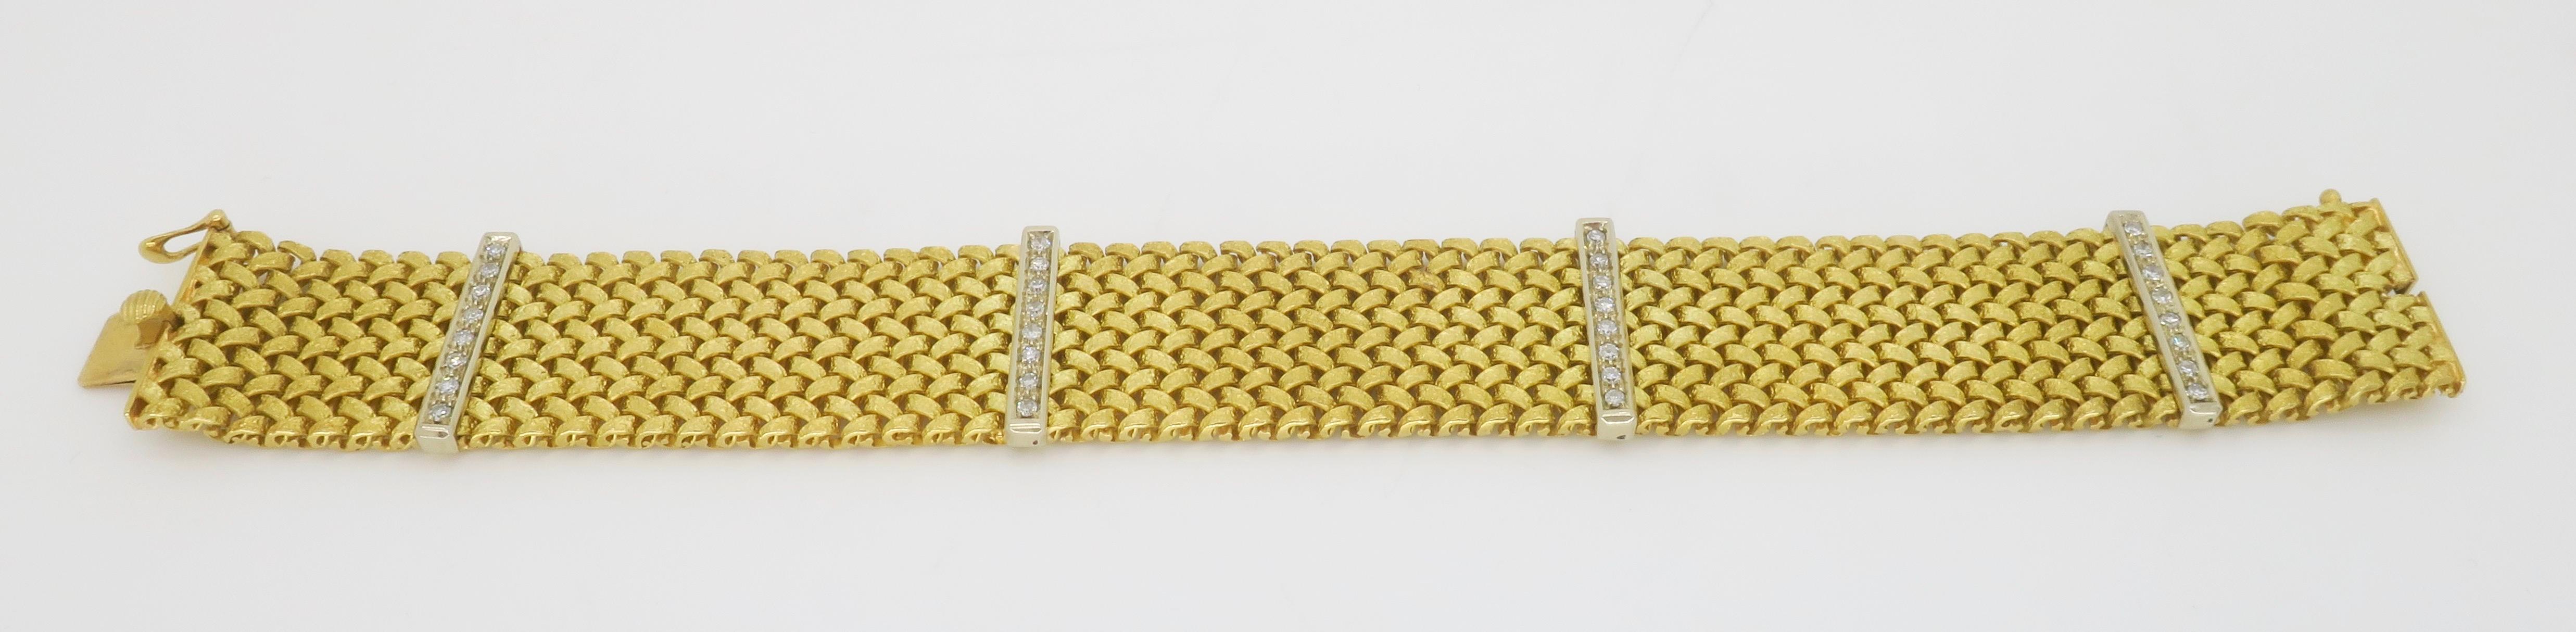 Women's or Men's Intricate Mesh Bracelet Made in 18k Yellow Gold with Diamonds